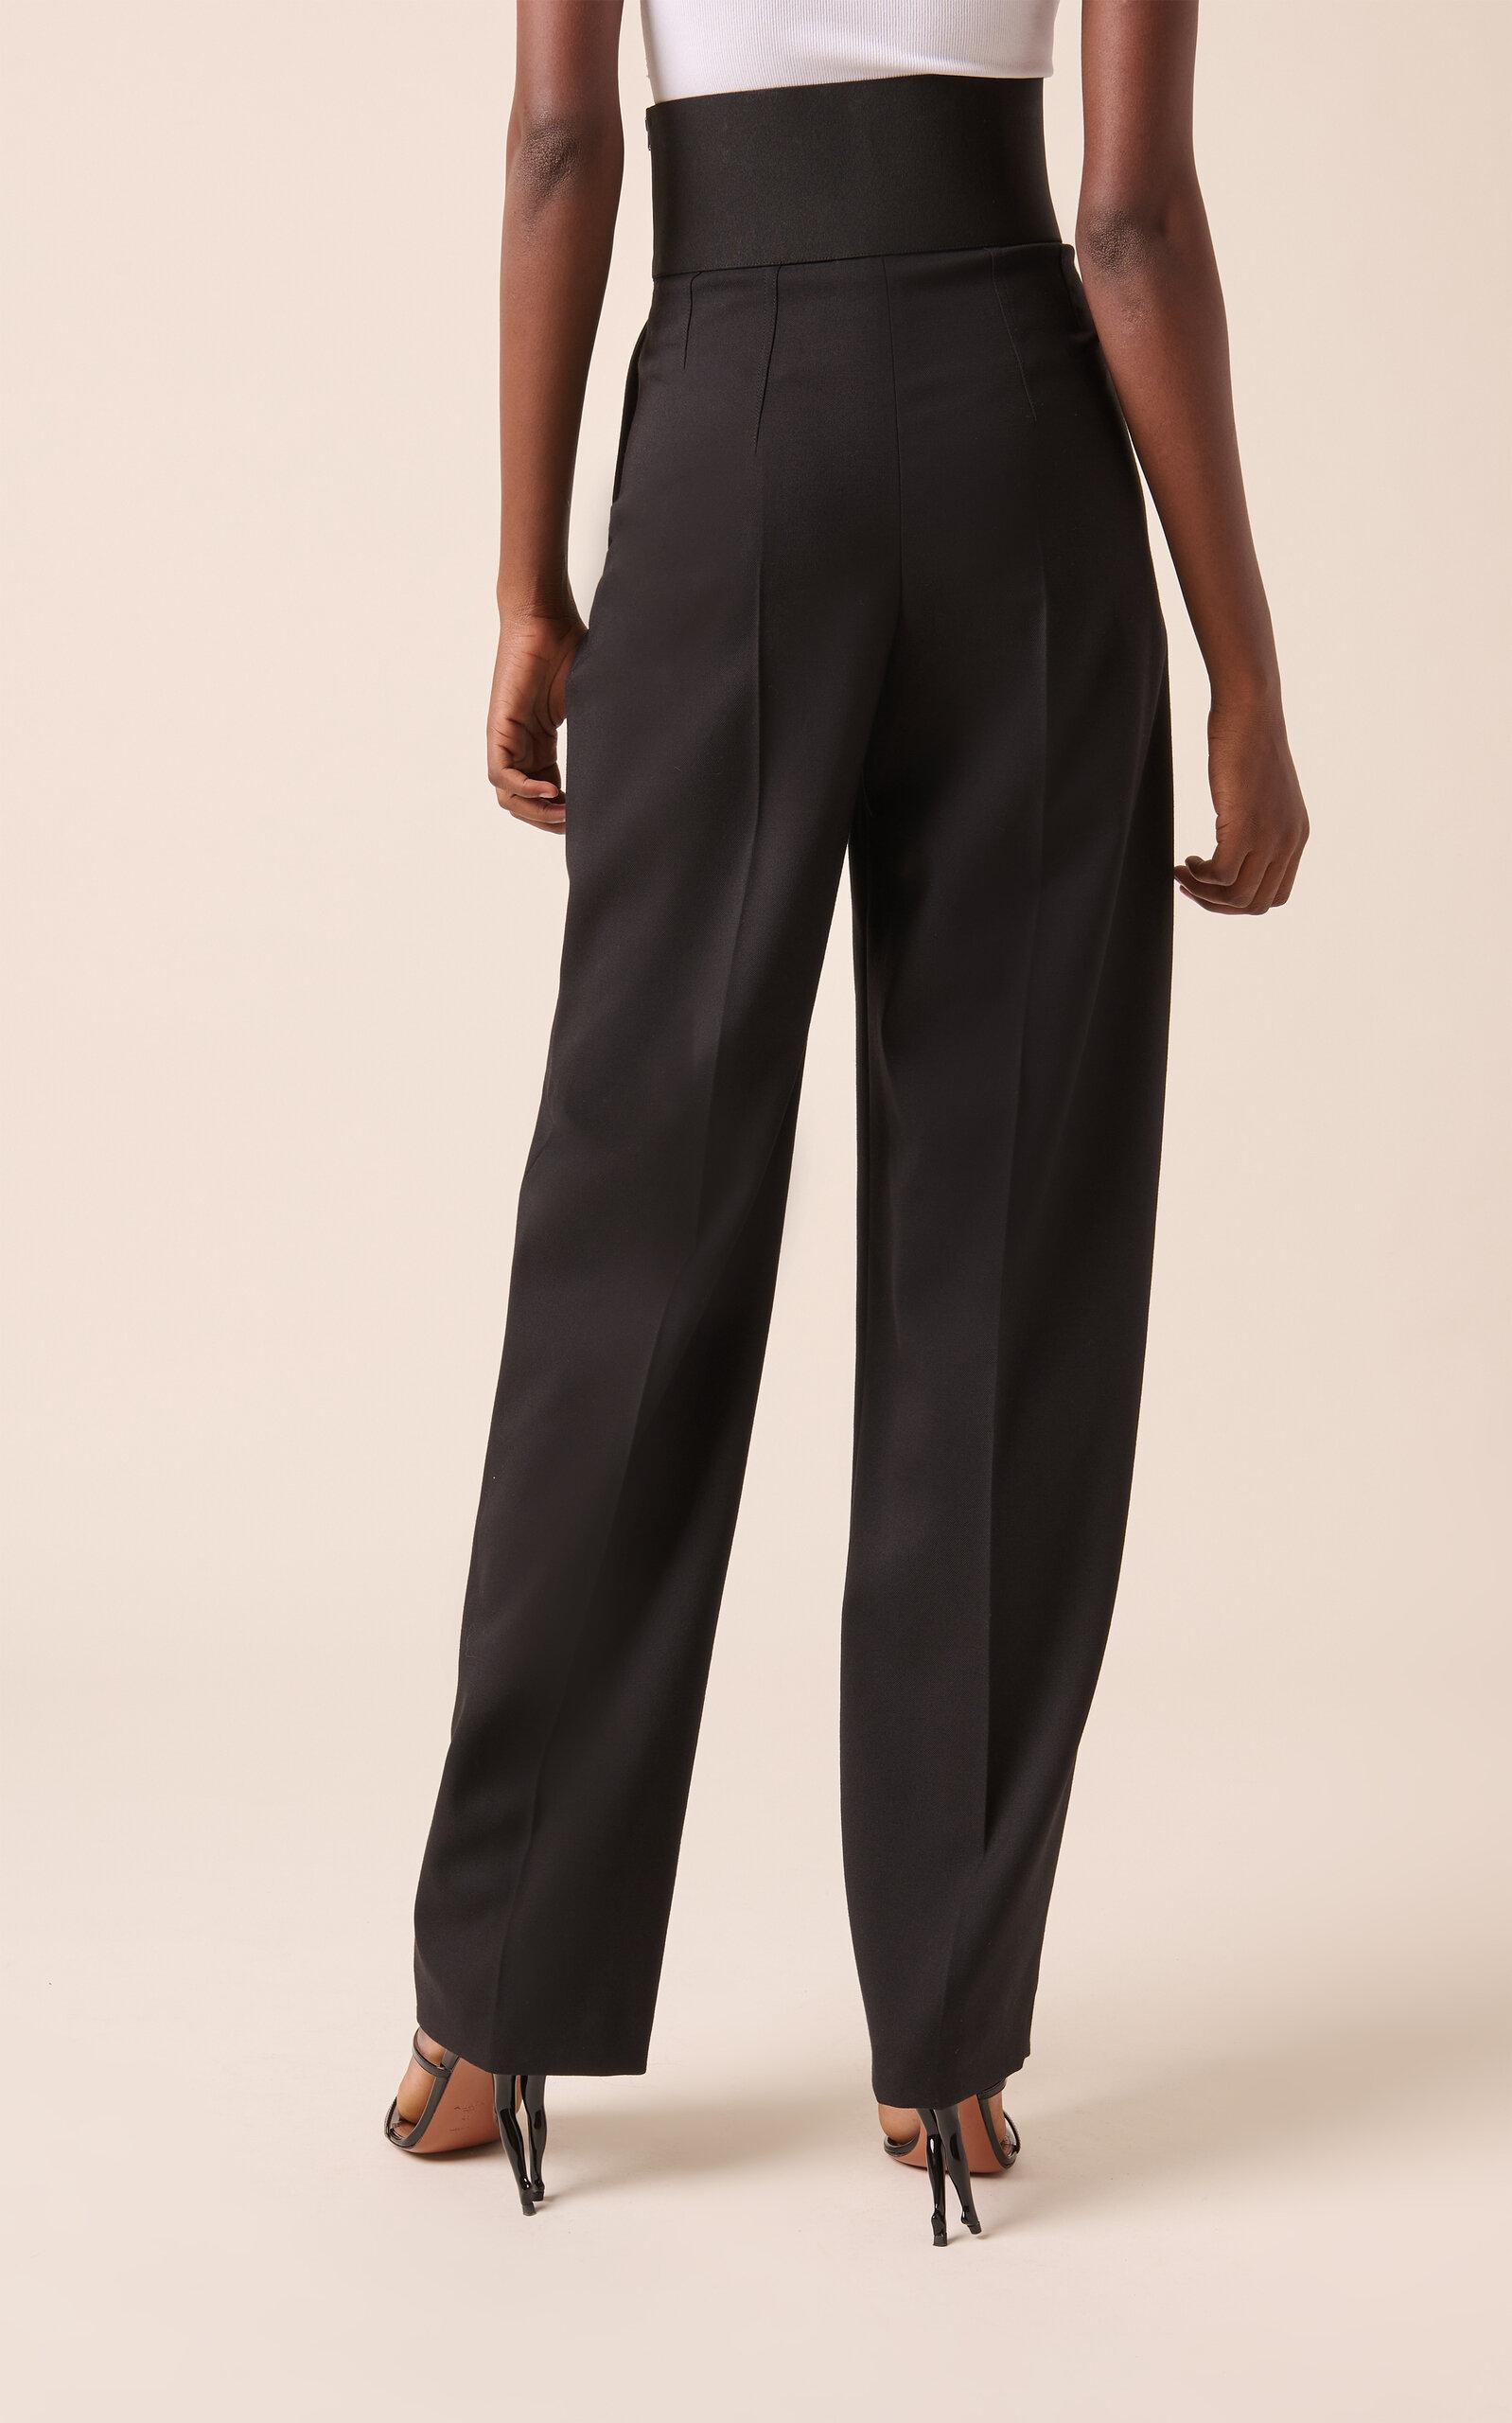 Alaïa Belted High-waisted Wool-blend Pants in Black | Lyst